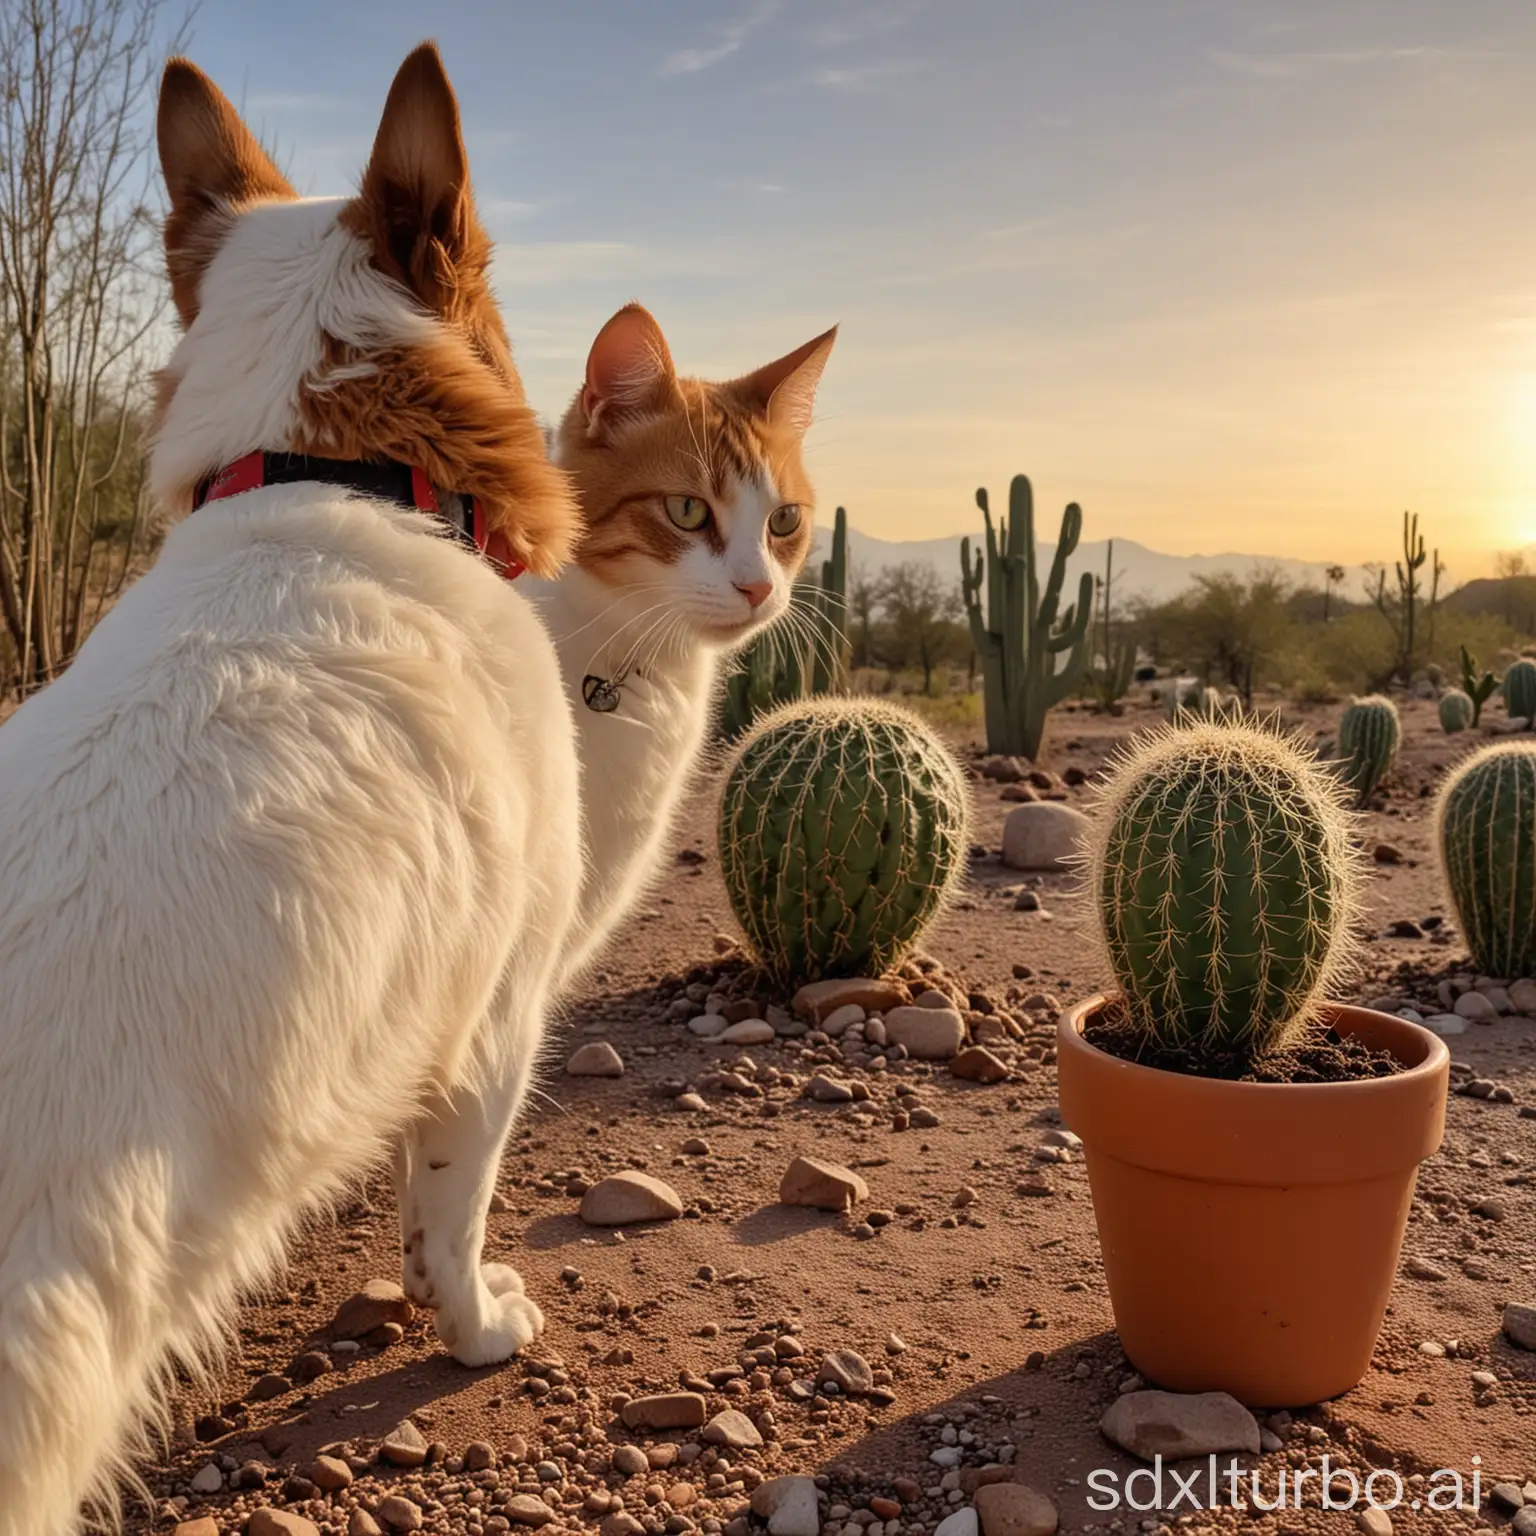 a distracted dog gazing at the horizon doesn't notice that a cat is chasing it with a cactus pot about to poke the dog from behind